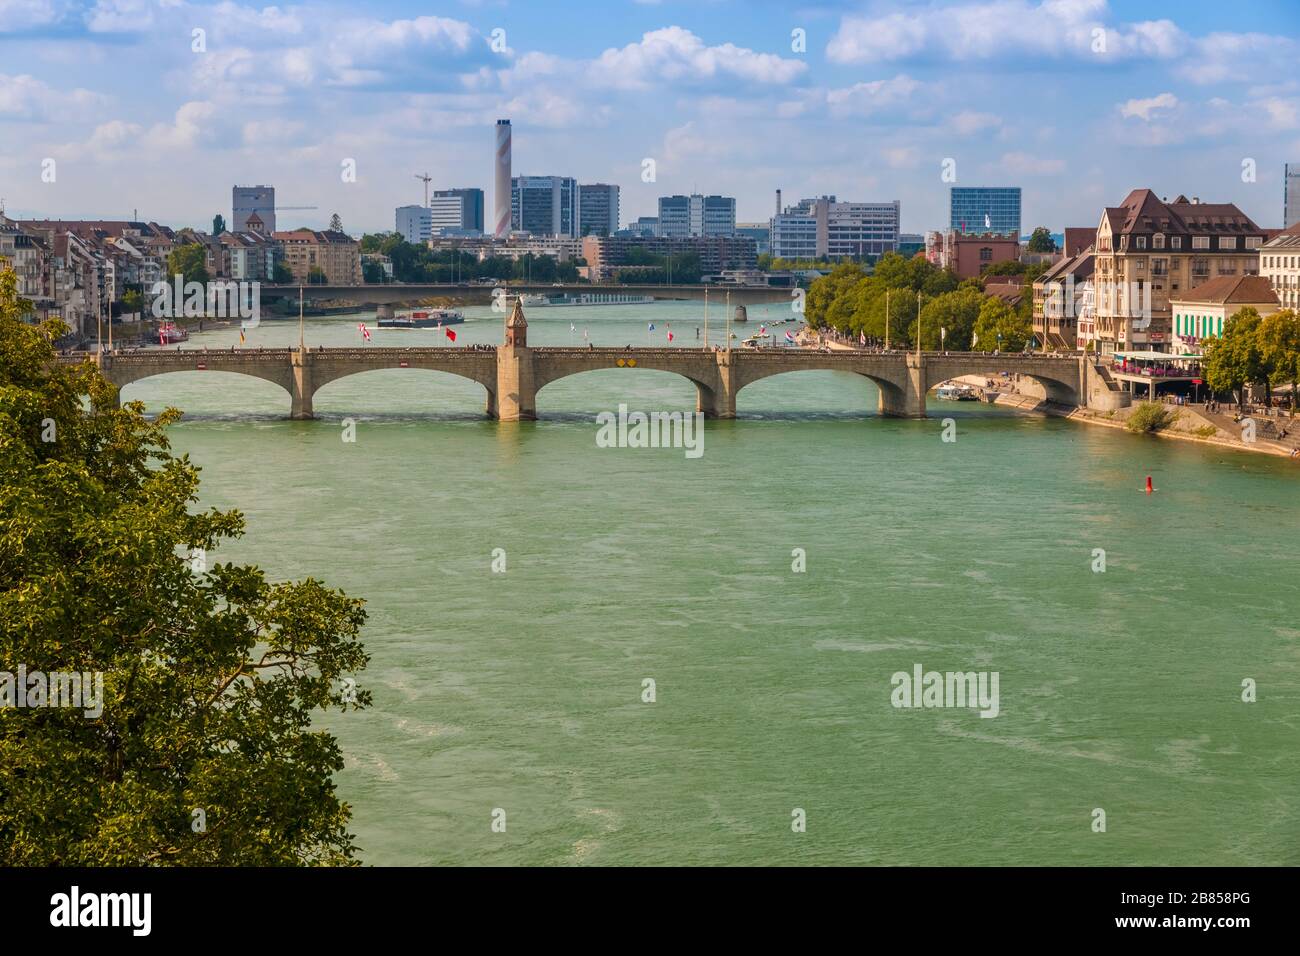 Nice view of the Rhine river with the Middle Rhine Bridge and the industrial area in the background. The bridge connects the main section of Basel... Stock Photo